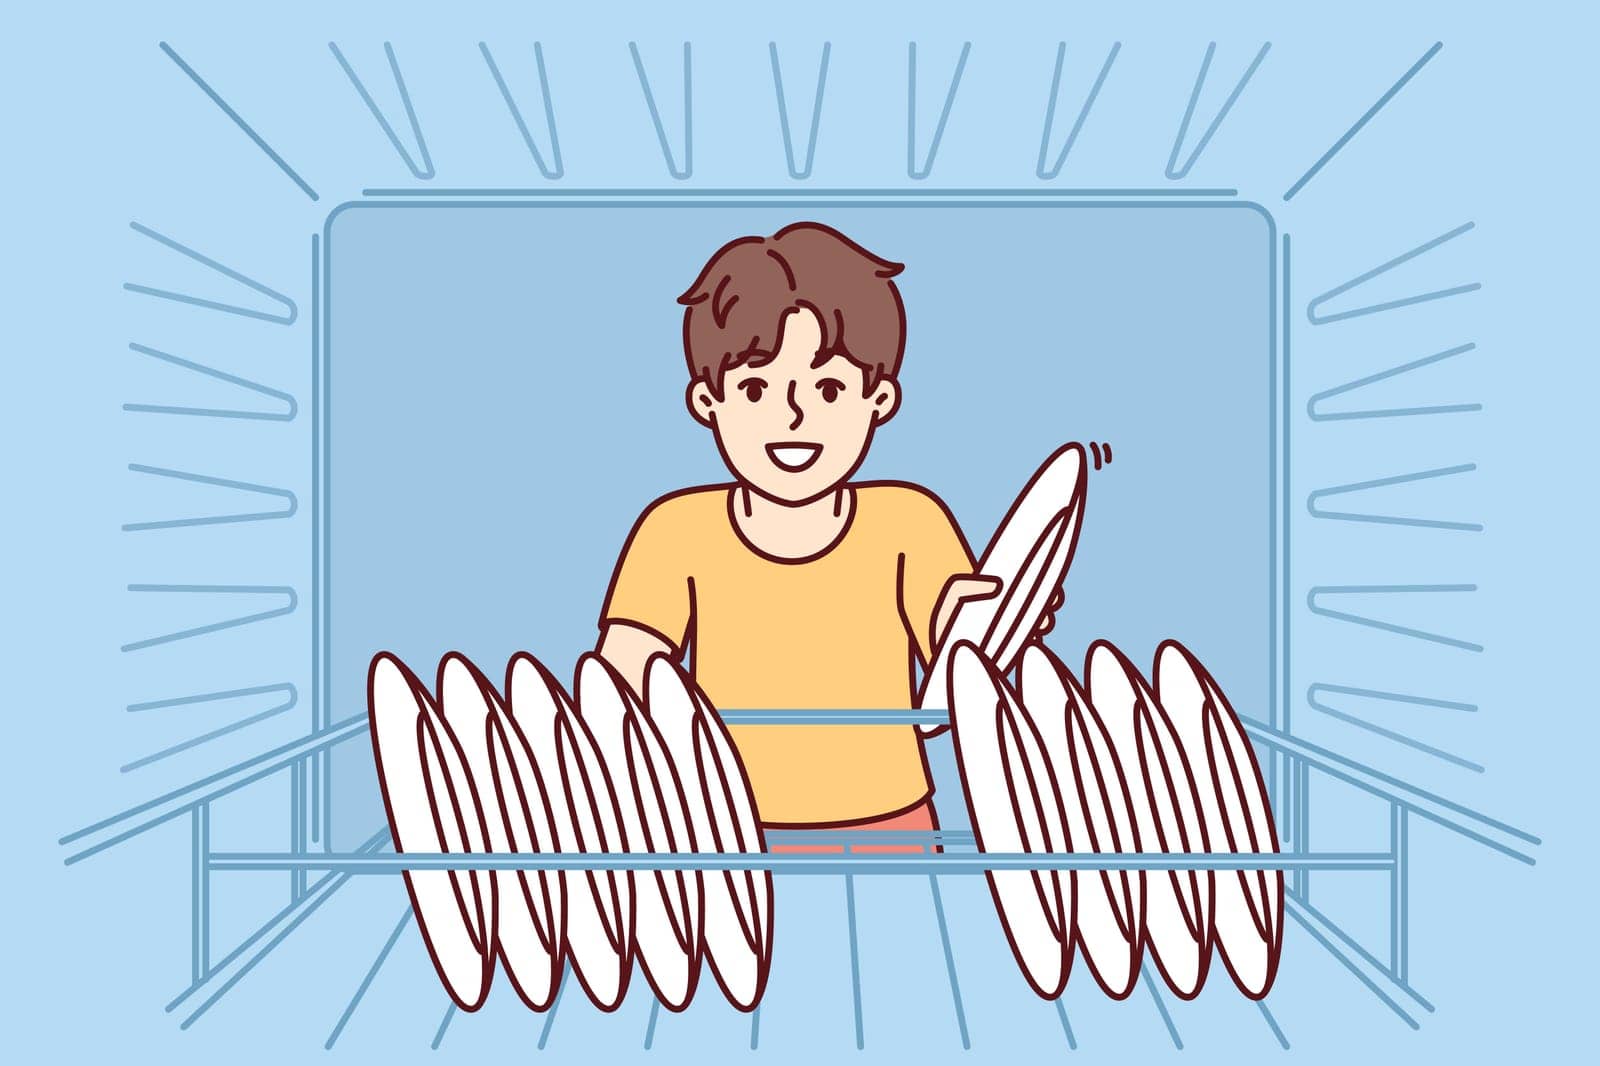 Little boy puts dishes in dishwasher to keep himself hygienic and to help parents with housework. Happy preeteen child unloads dishwasher with pleasure and looks at screen smiling.